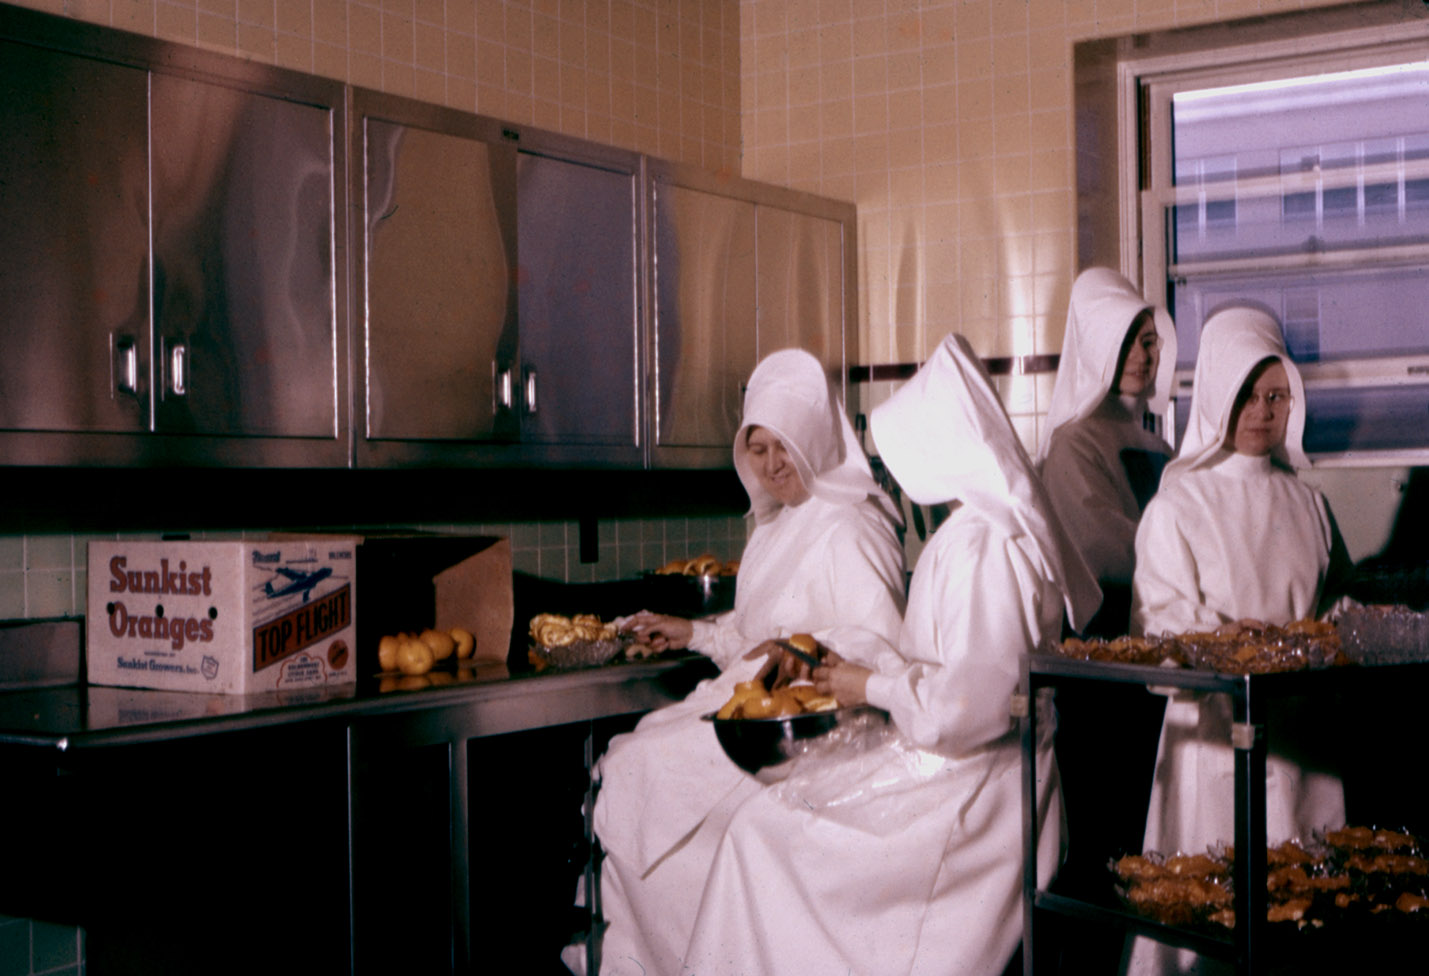 communityalbums - Sisters of Charity-Halifax working in the kitchen, Mount Saint Vincent Mother House, Halifax, Nova Scotia.